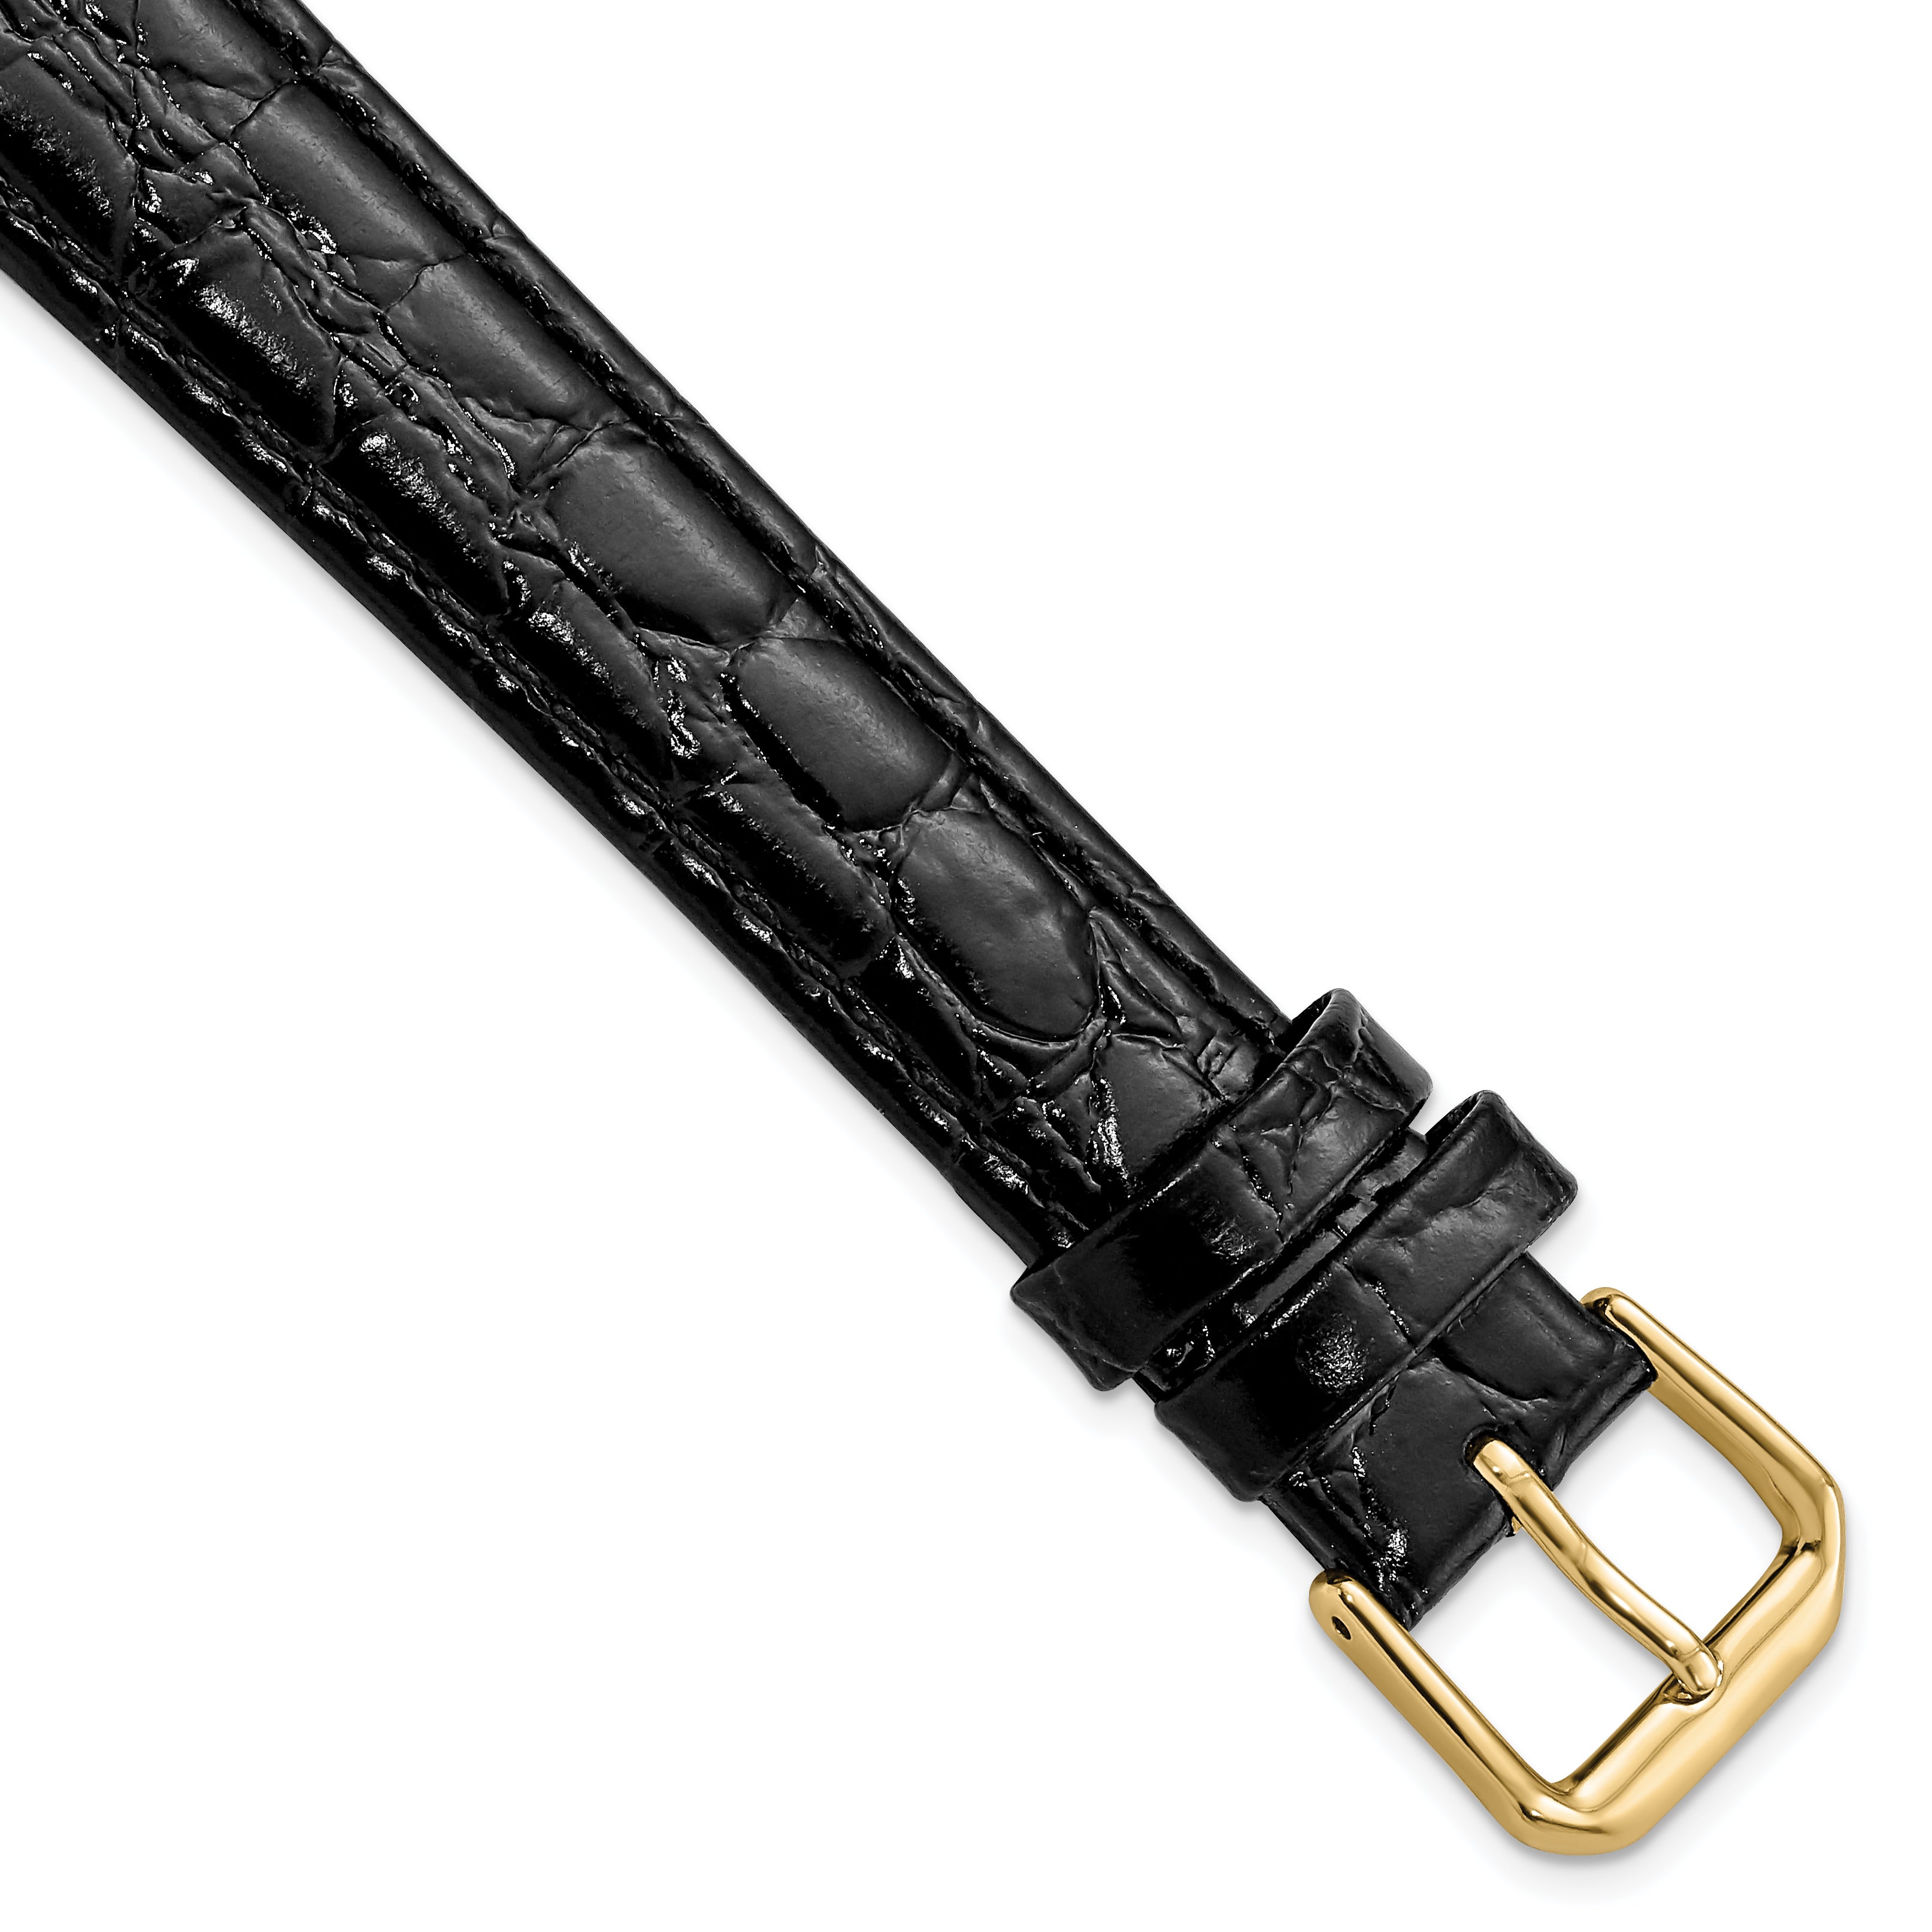 DeBeer 16mm Long Black Alligator Grain Leather with Gold-tone Buckle 8.5 inch Watch Band